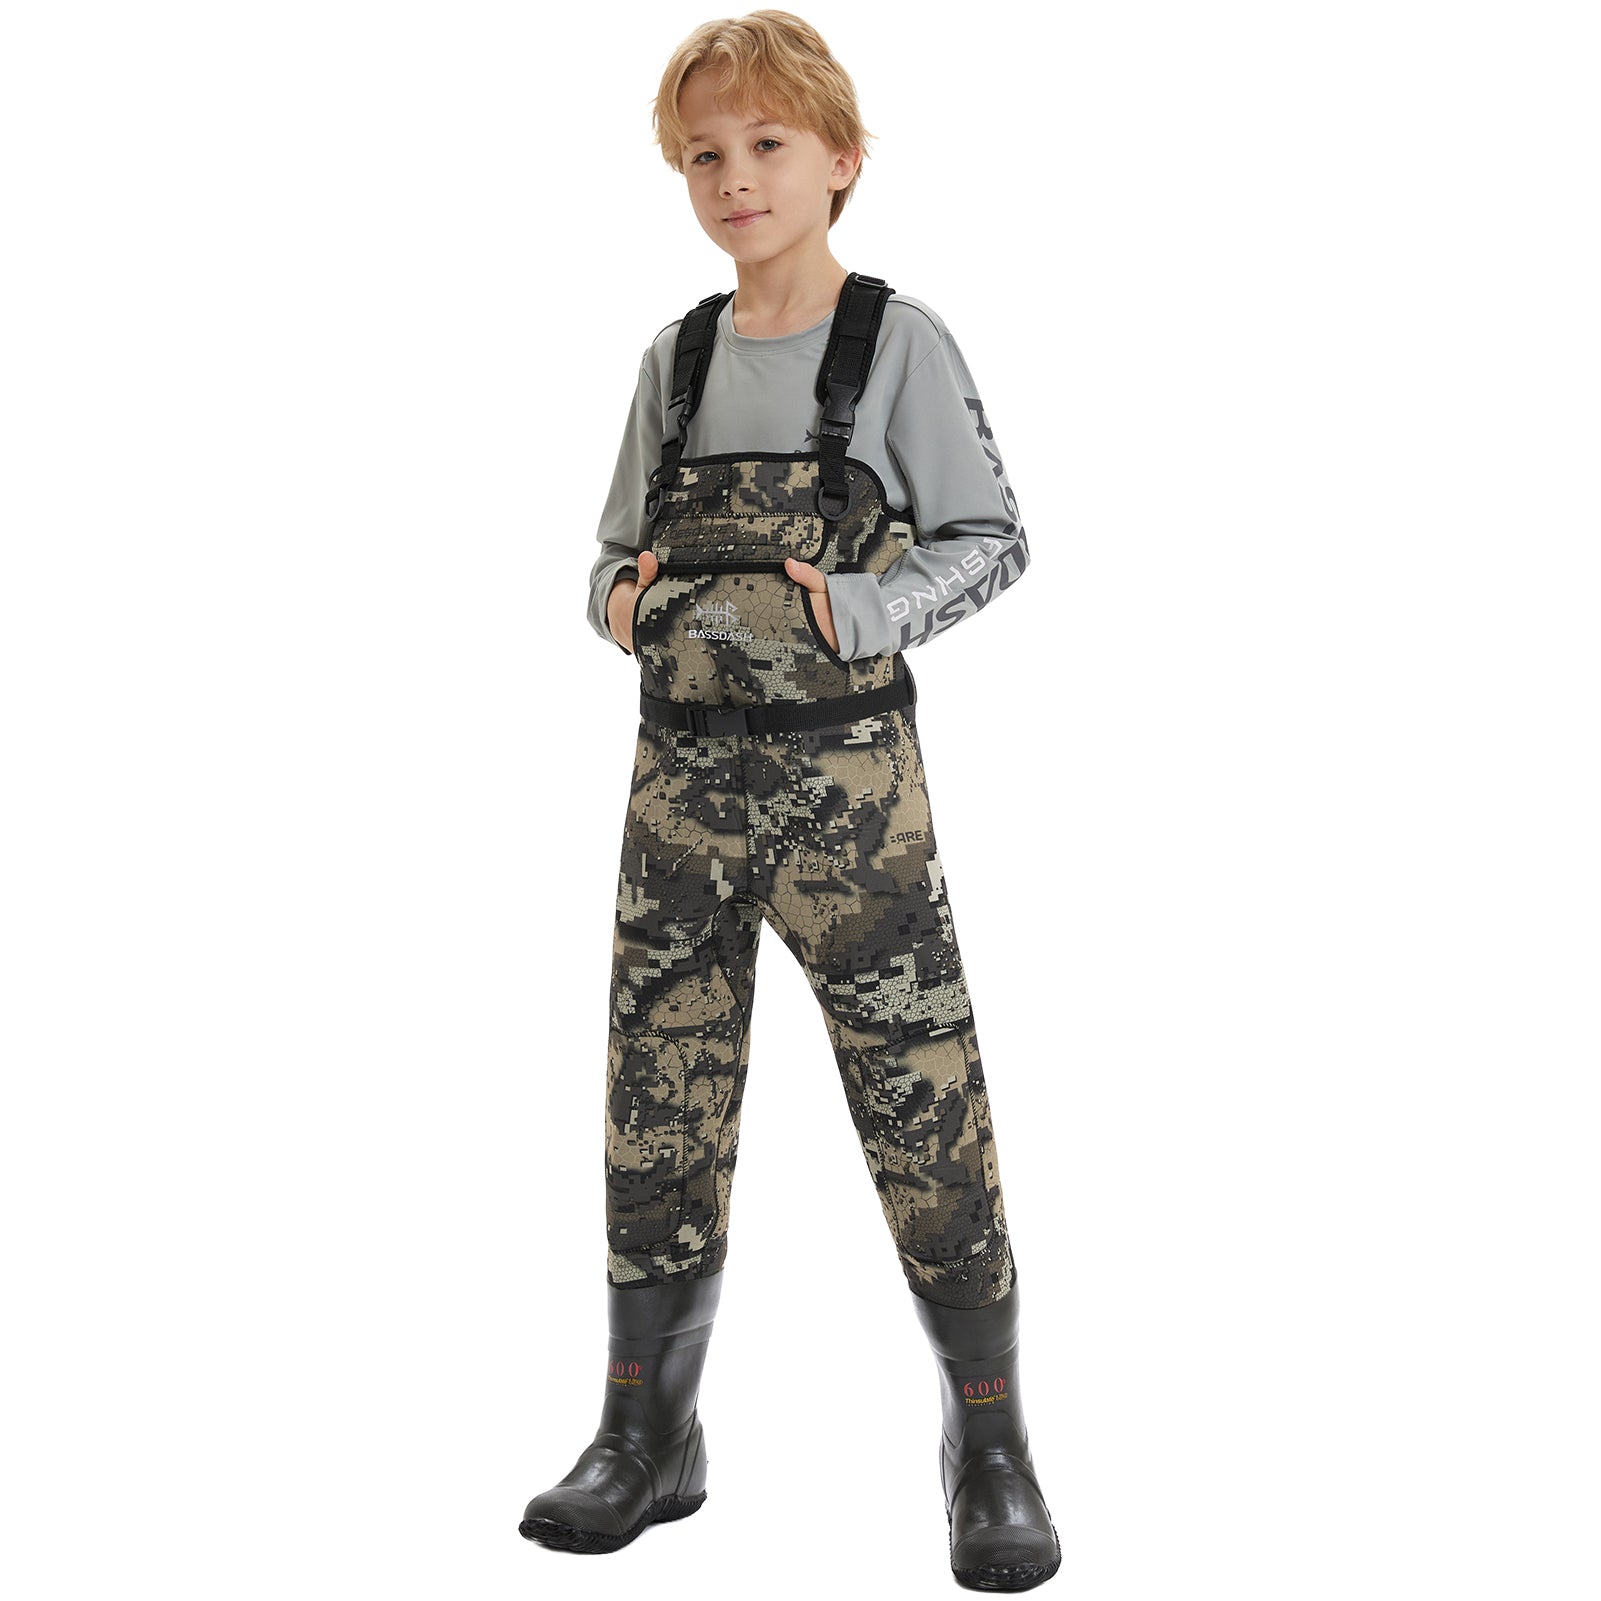 Kids Chest Waders Youth Fishing Waders For Toddler Baby Boy Outfit